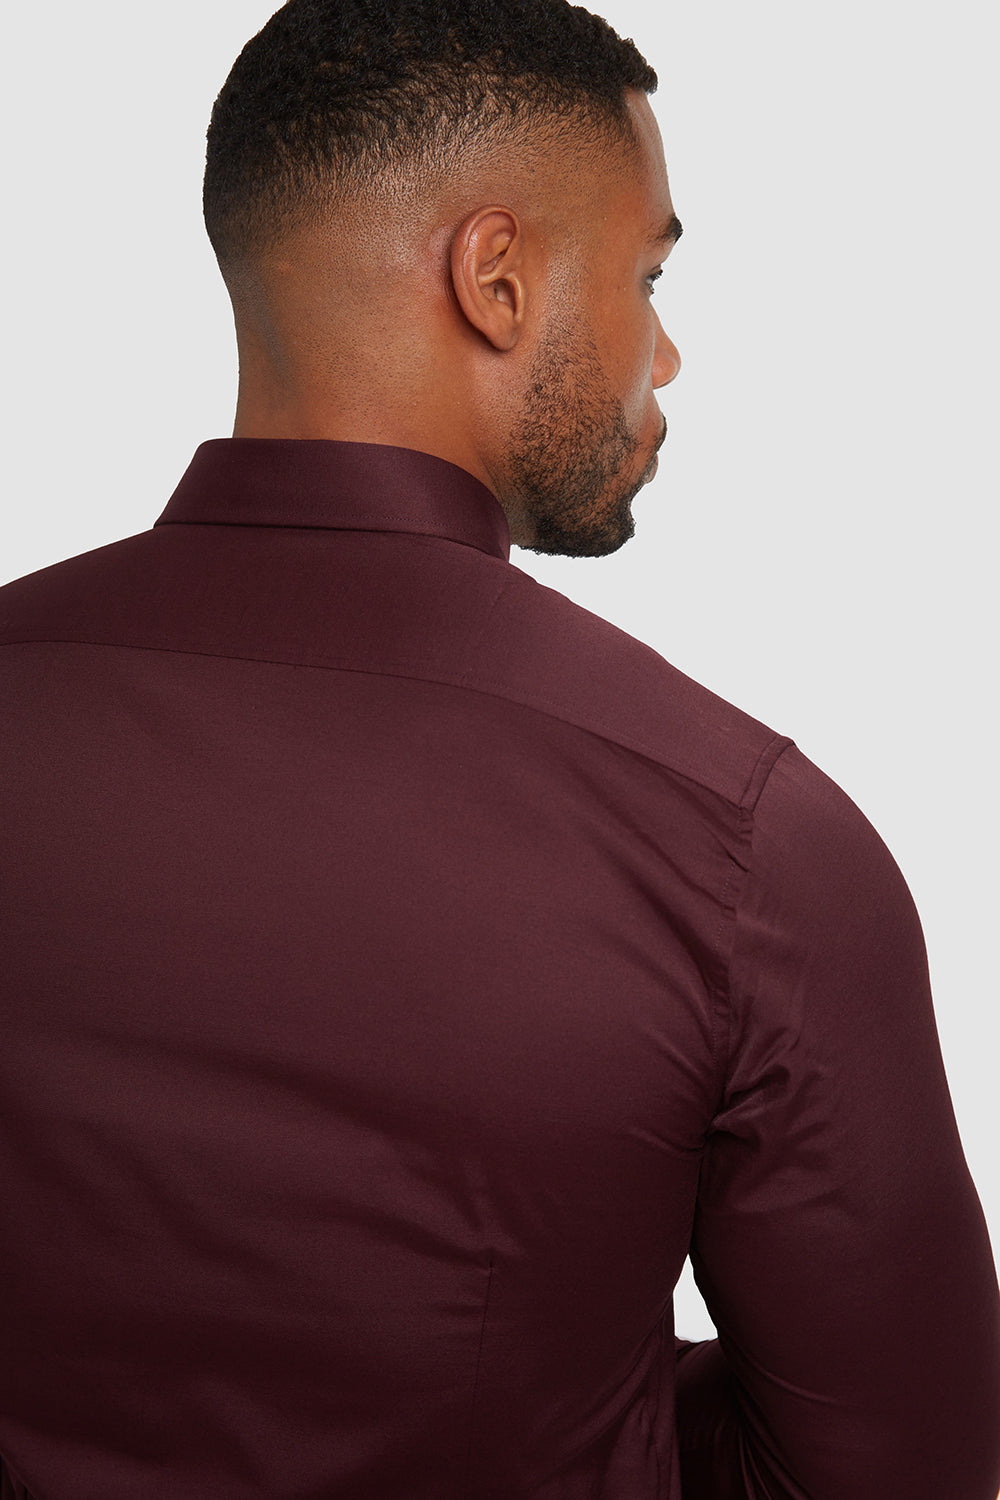 Muscle Fit ATHLETE in - - Burgundy TAILORED 2.0 Shirt USA Signature